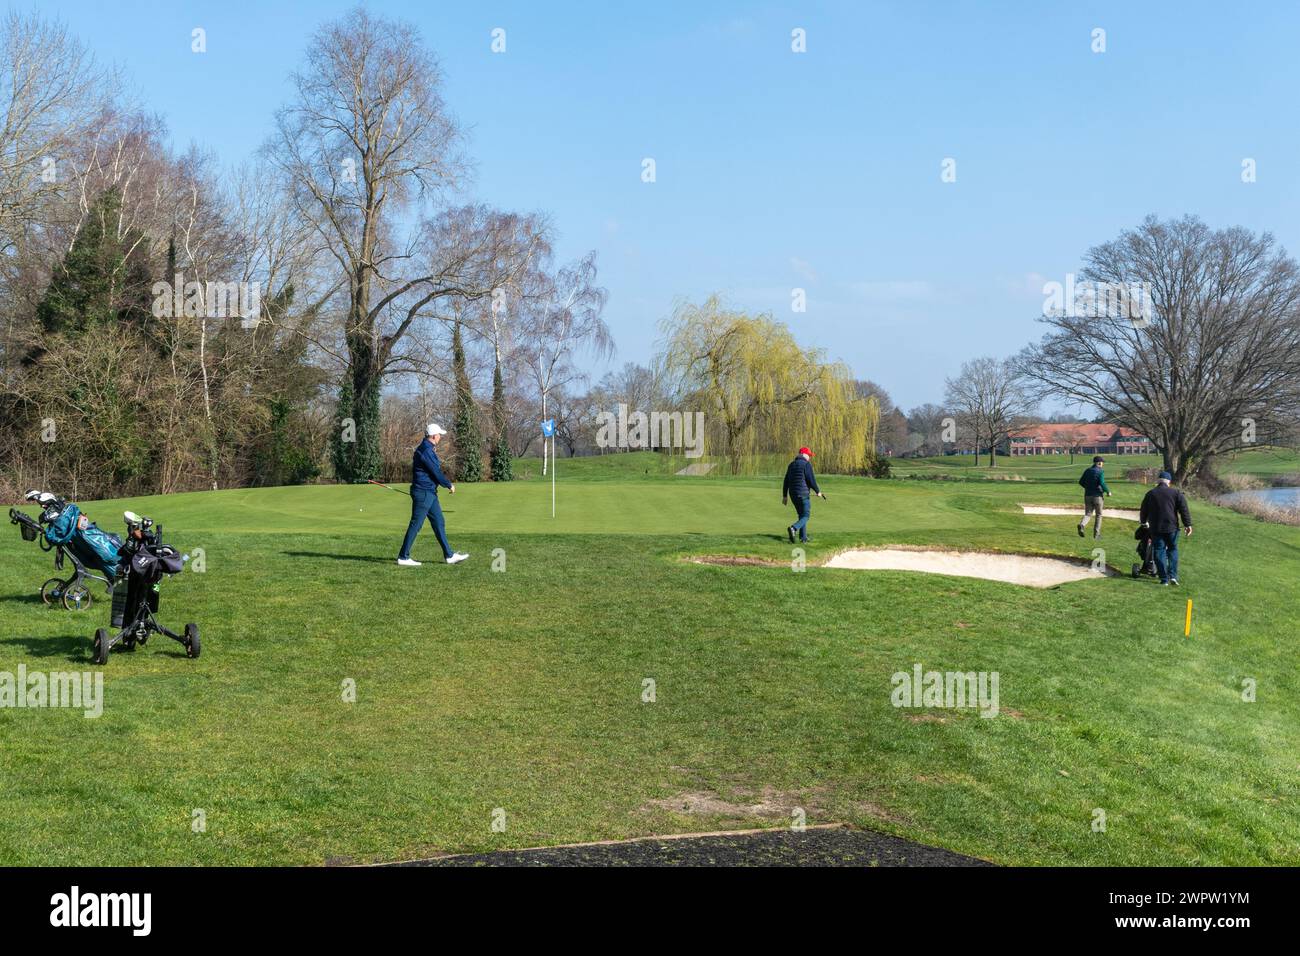 View of Wisley golf club and golf course with golfers playing, Surrey, England, UK Stock Photo